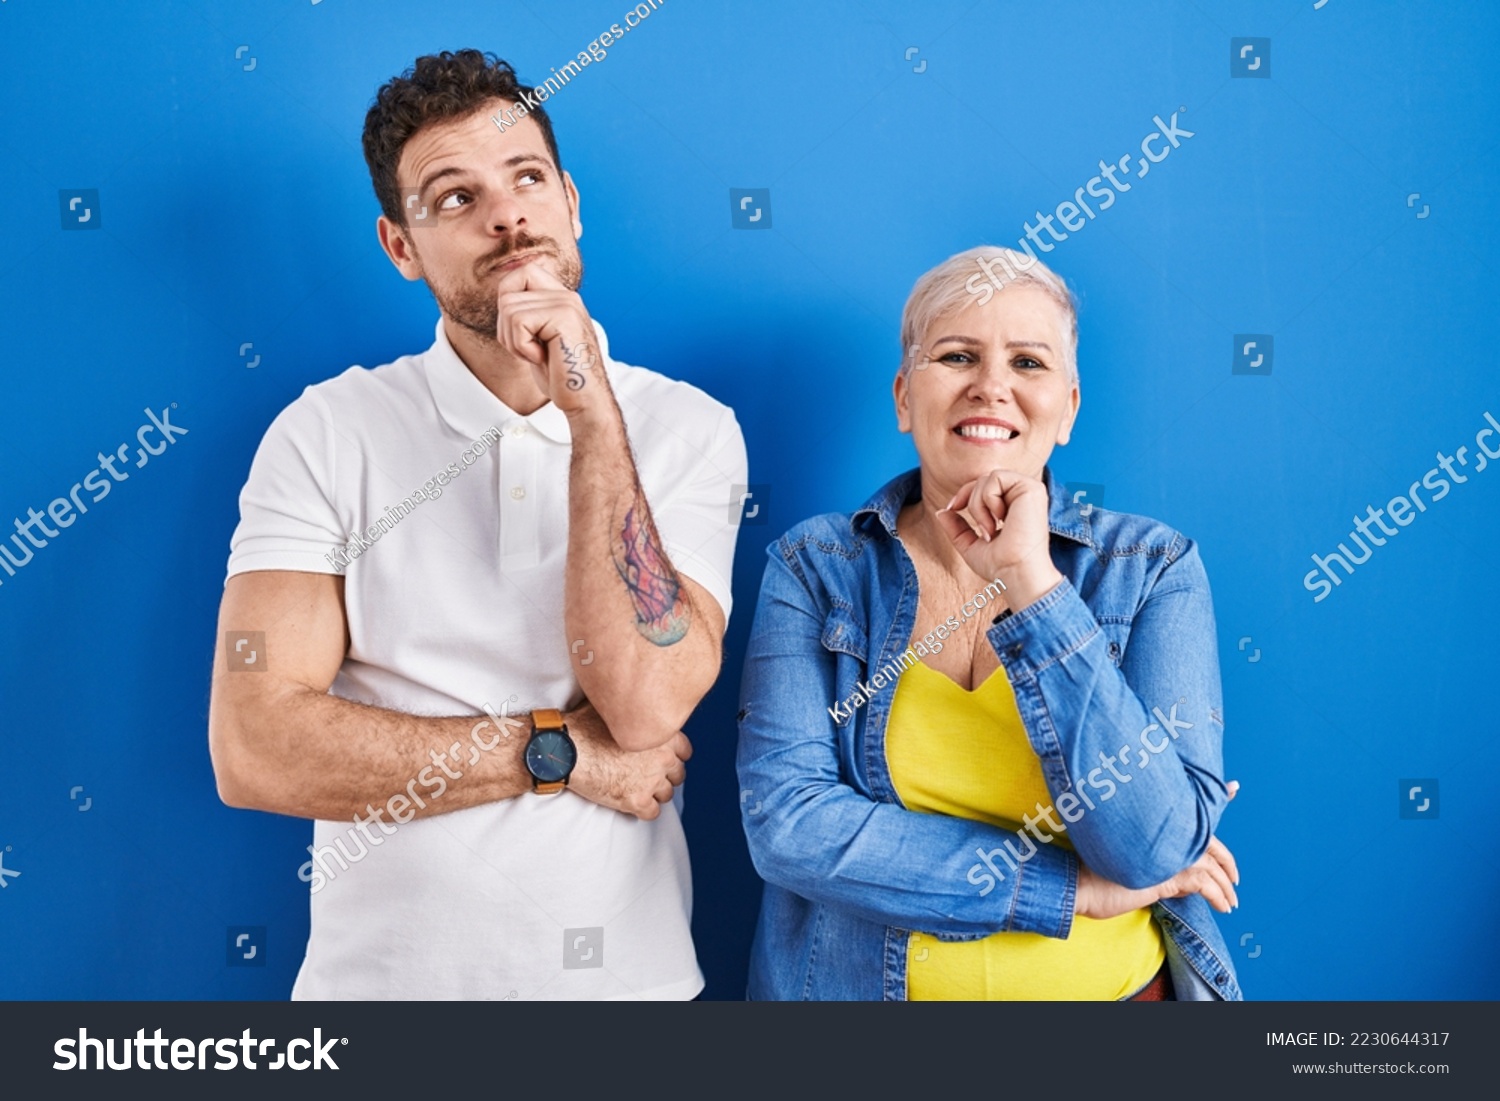 Young brazilian mother and son standing over blue background with hand on chin thinking about question, pensive expression. smiling and thoughtful face. doubt concept.  #2230644317